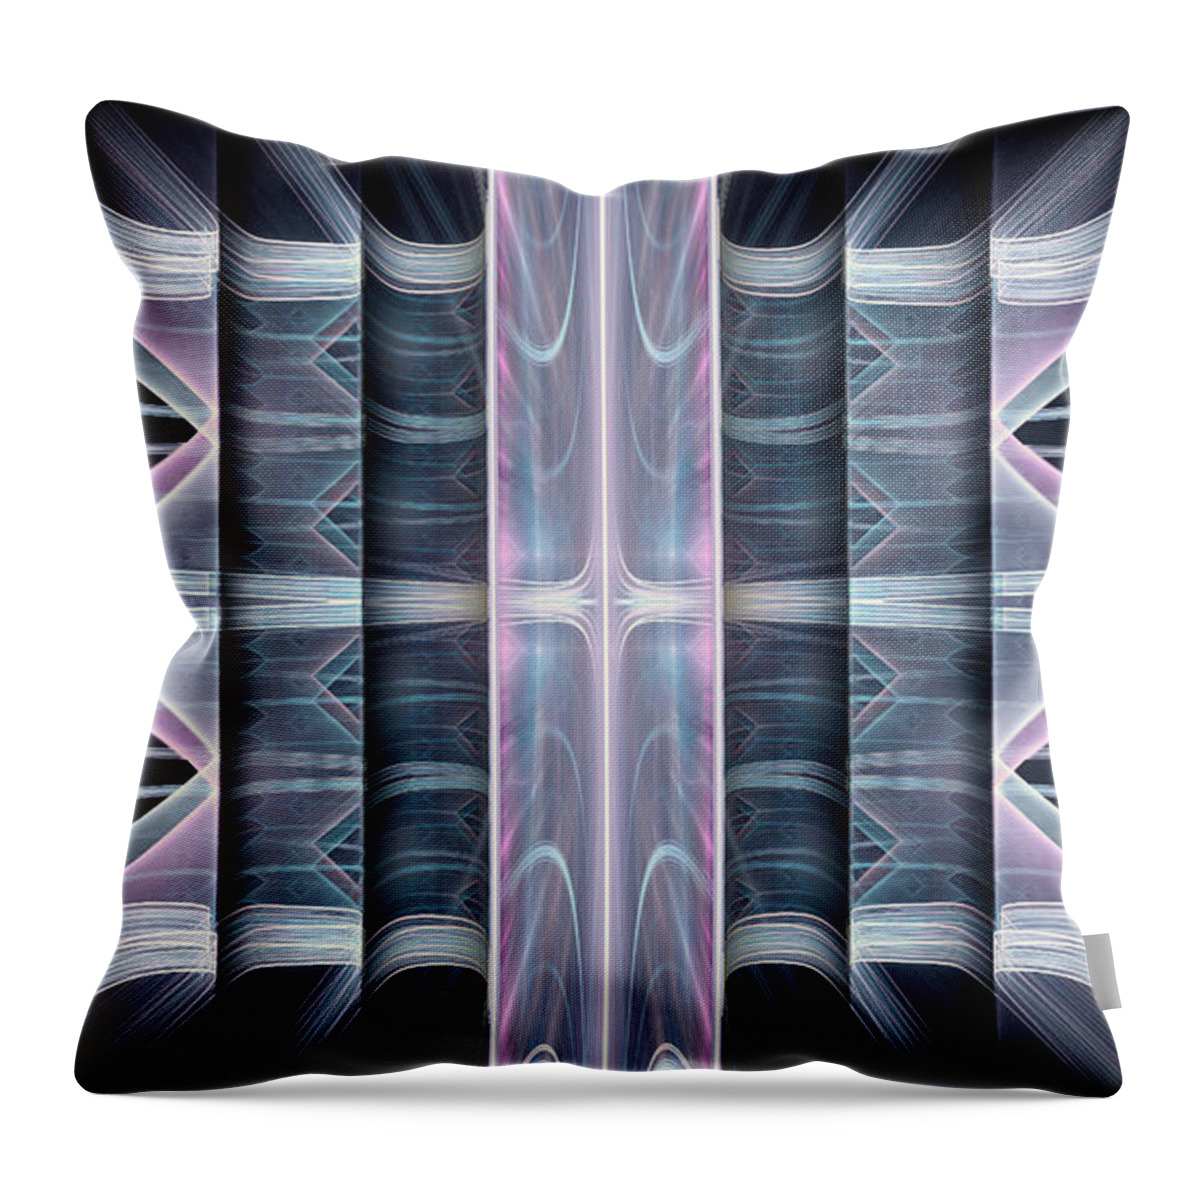 Acts Throw Pillow featuring the digital art Acts by Missy Gainer